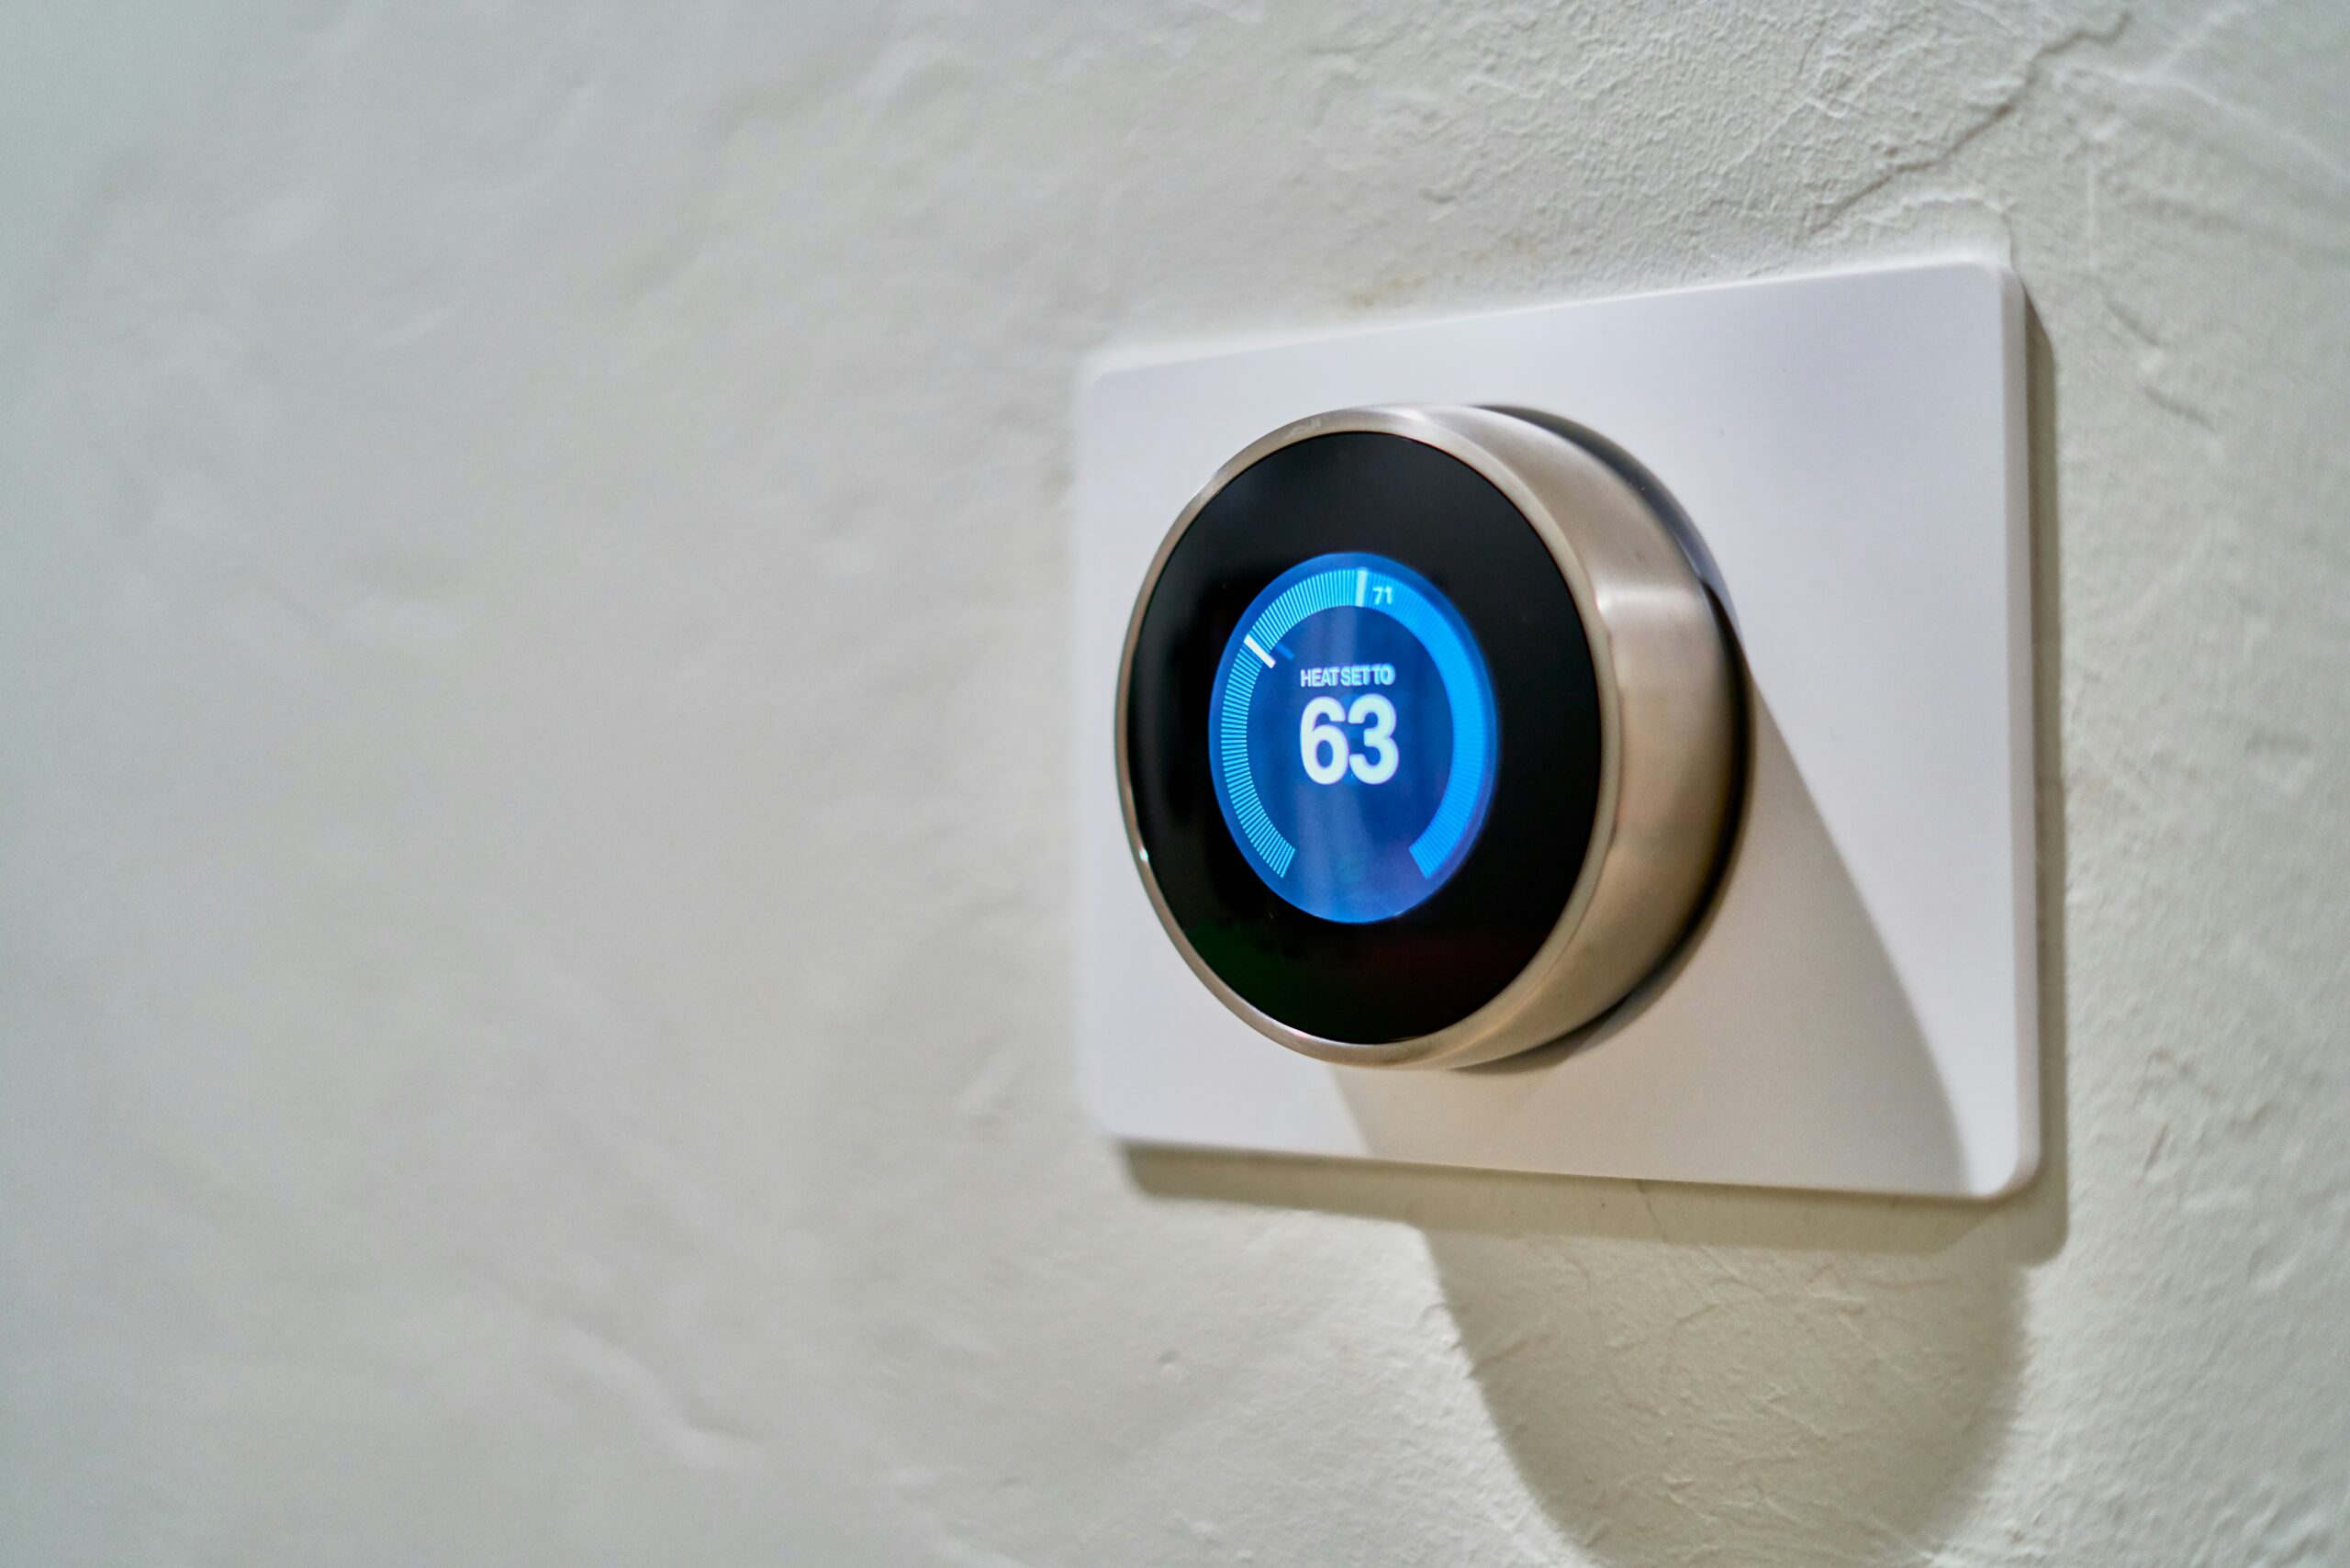 Smart Thermostat for Home